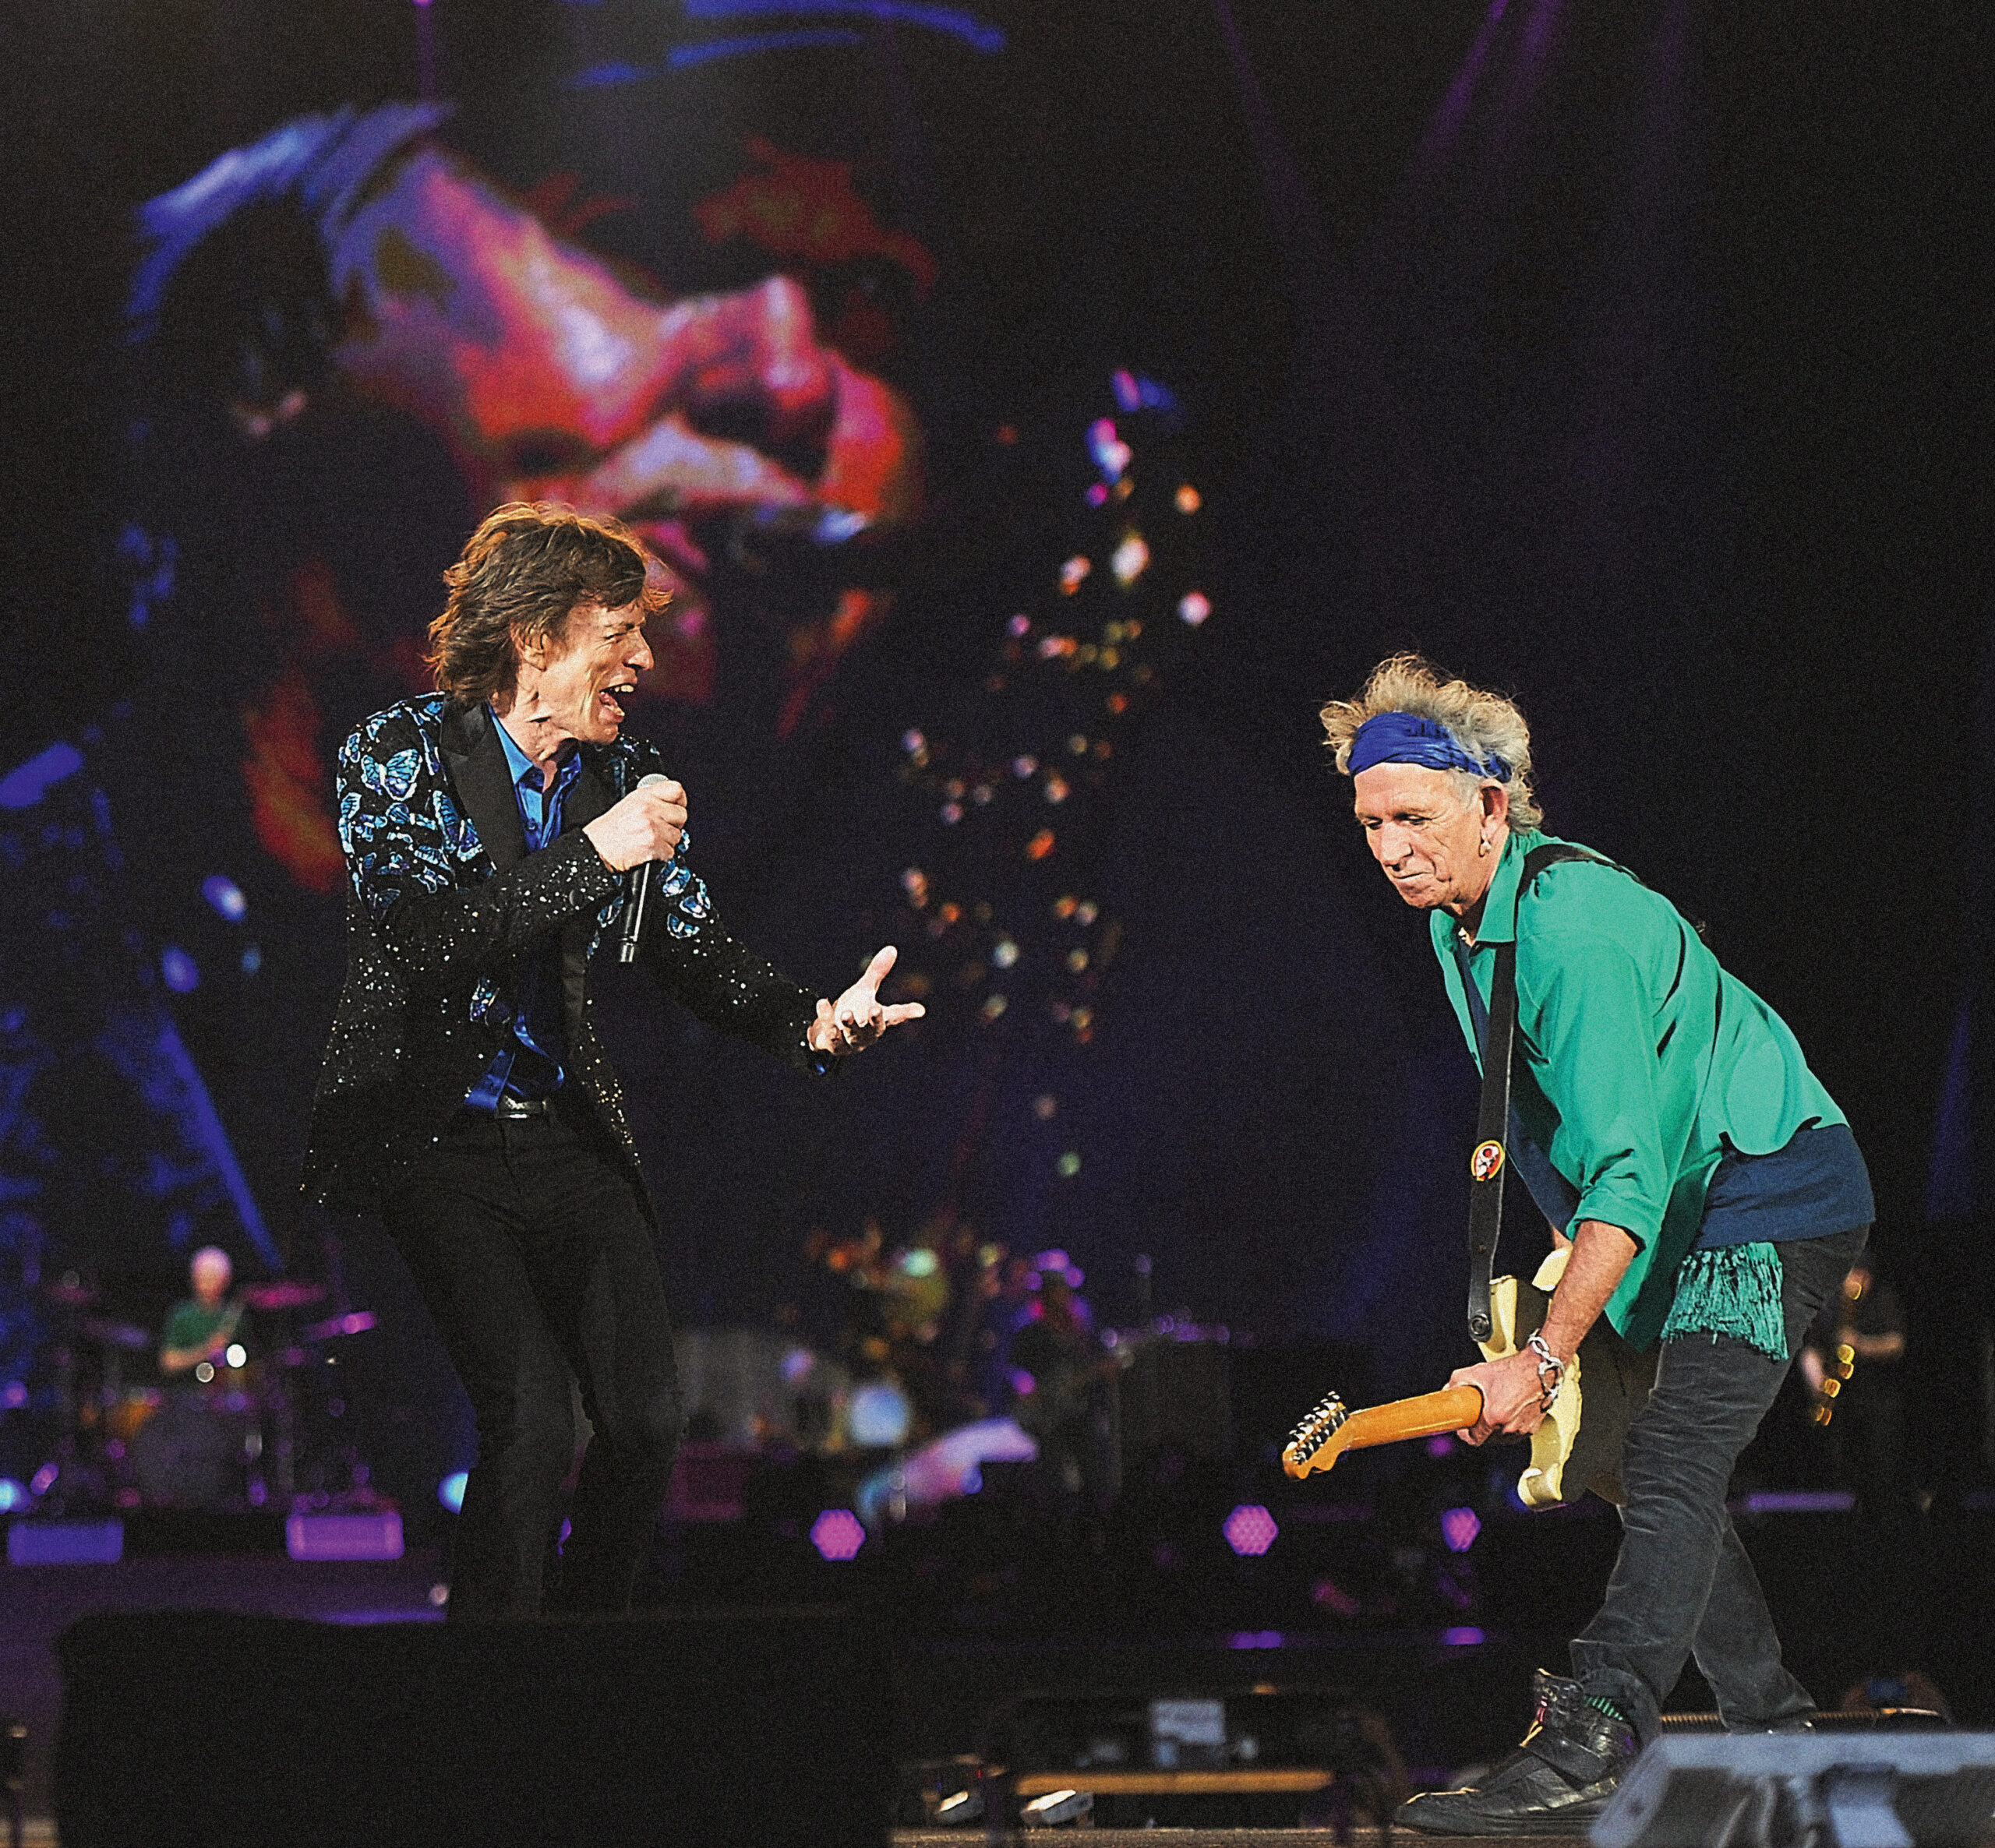 Photo of Mick Jagger & Keith Richards, The Rolling Stones. Photo taken by Brian Rasic